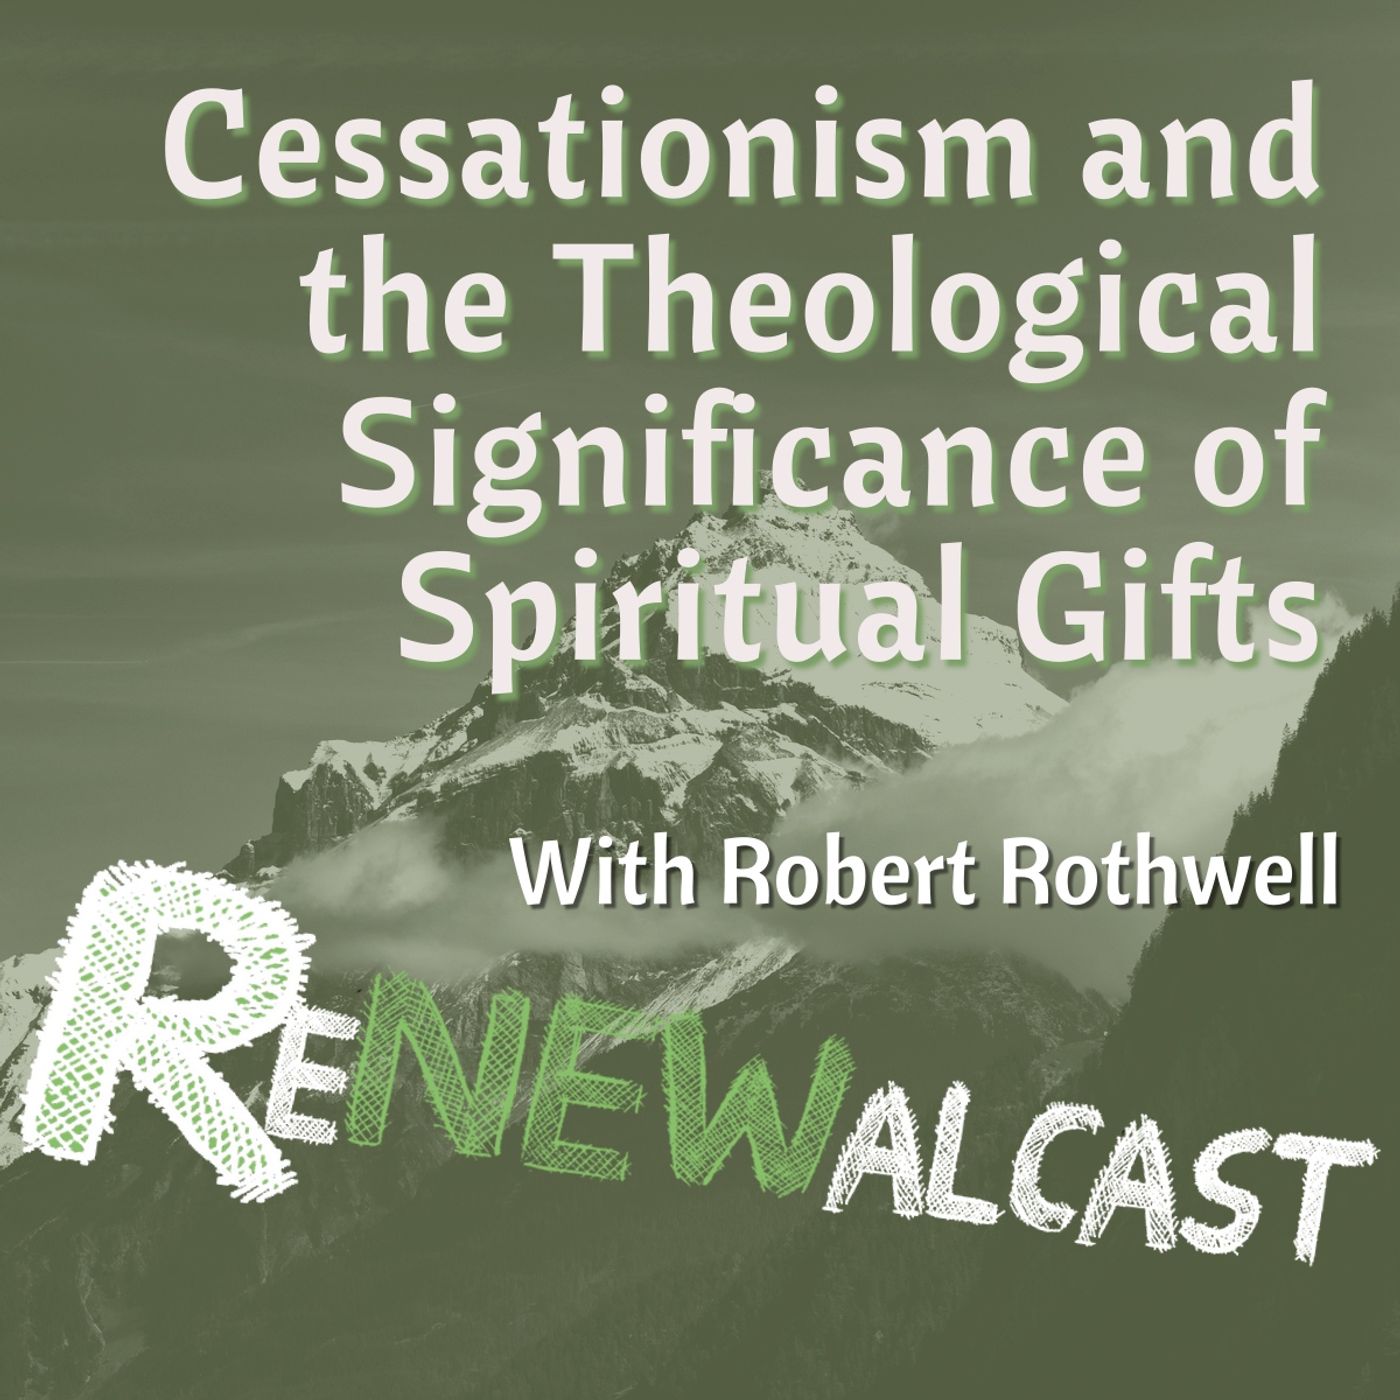 Cessationism and the Theological Significance of Spiritual Gifts with Robert Rothwell